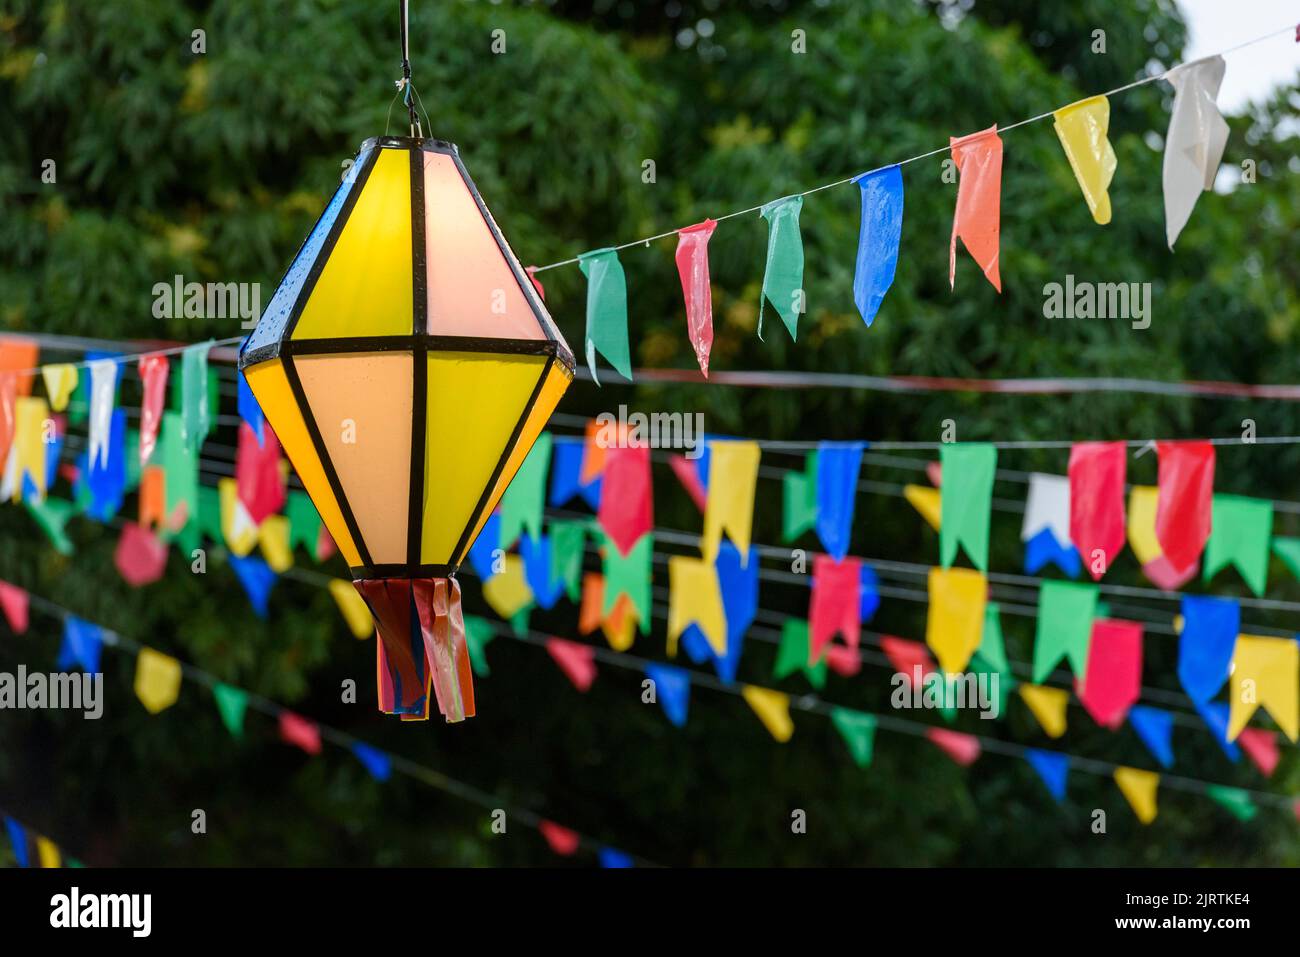 Colorful flags and decorative balloon for the Saint John party, which takes place in June in northeastern Brazil. Stock Photo